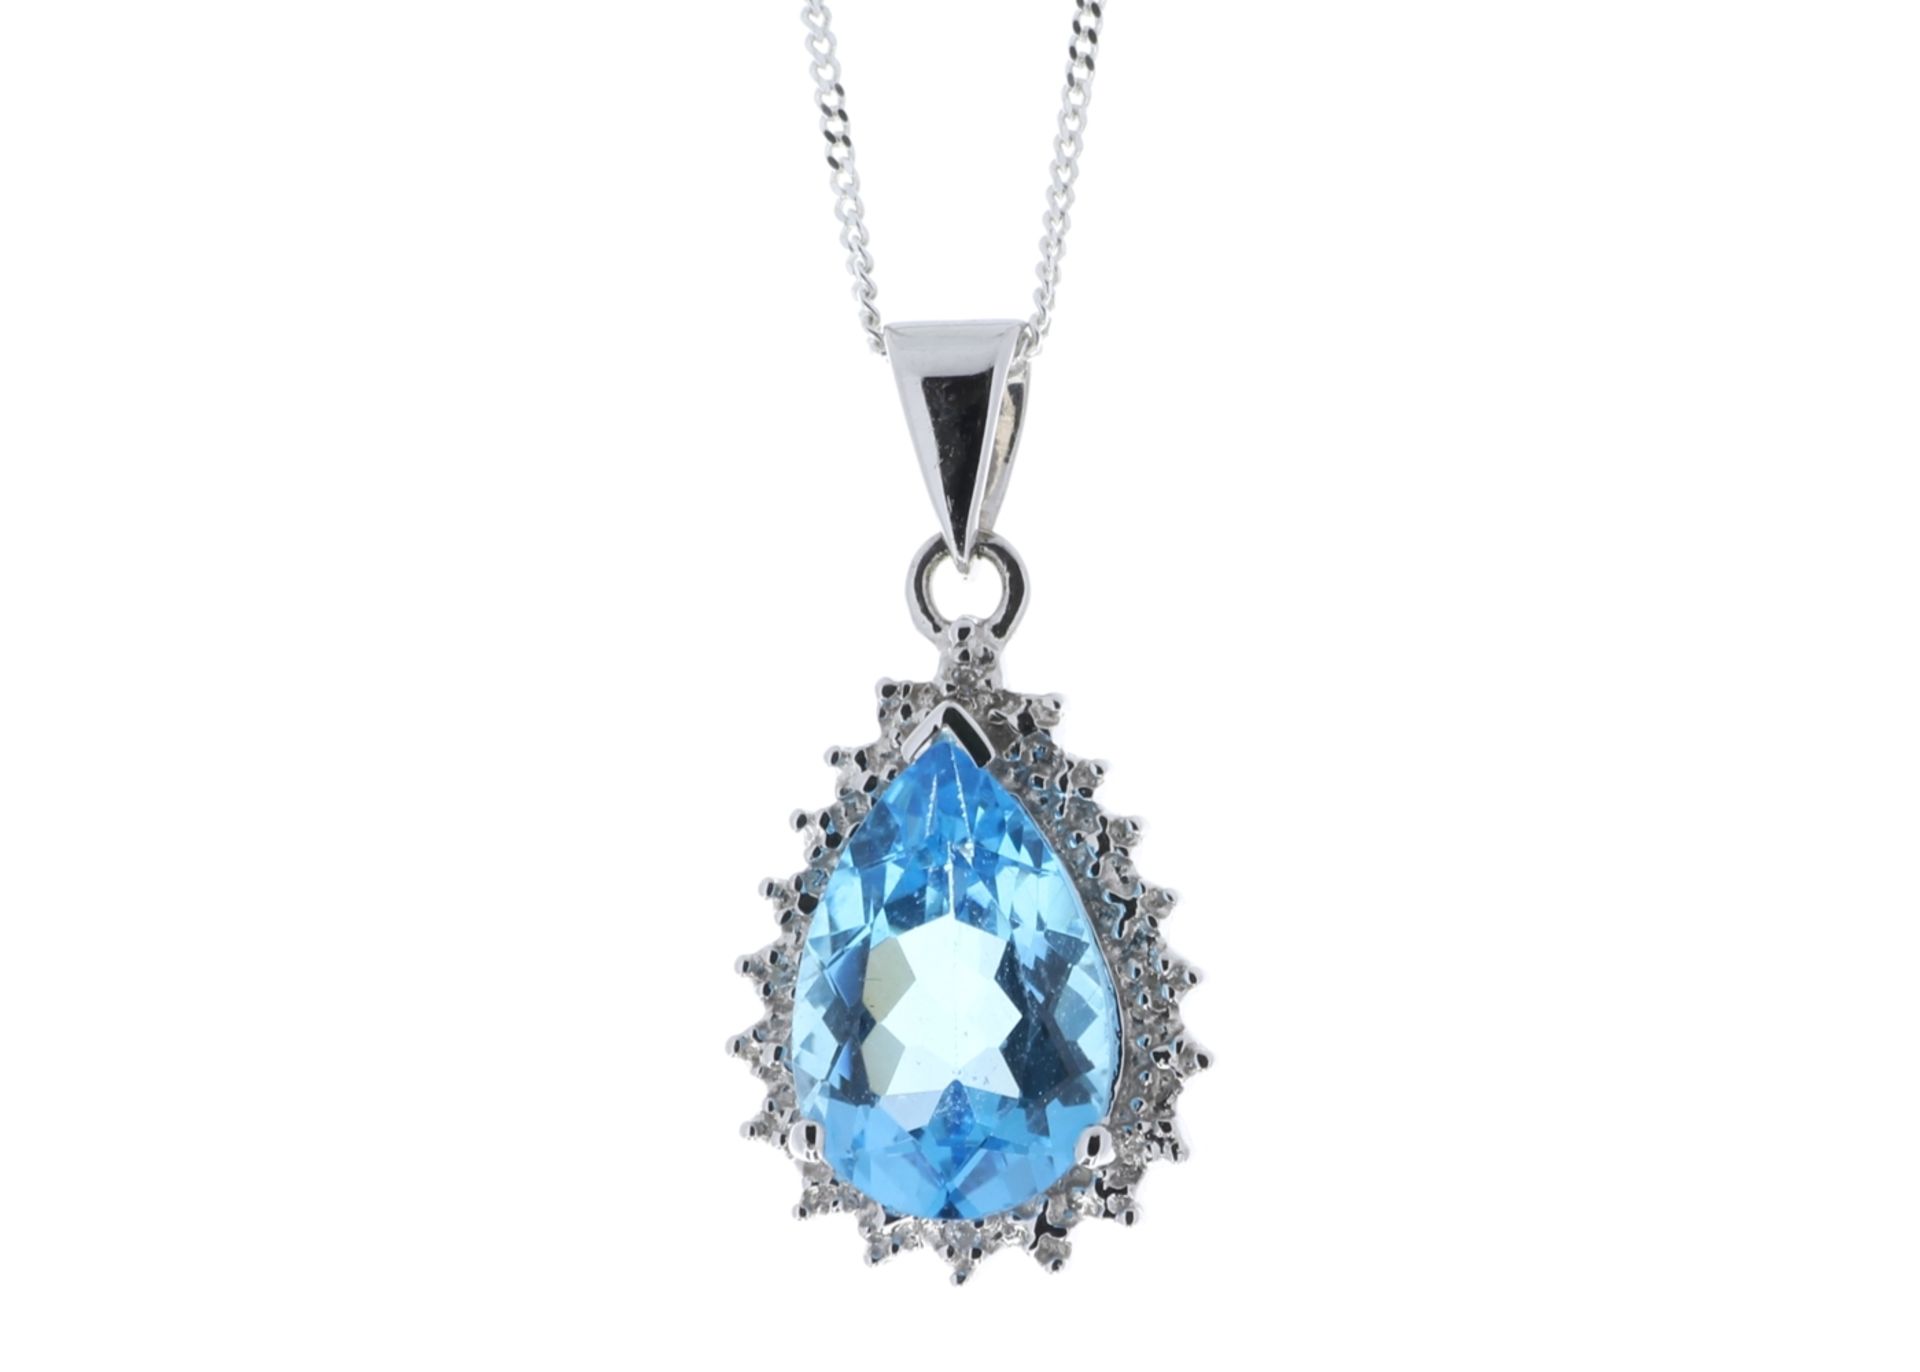 9ct White Gold Diamond And Blue Topaz Pendant 0.01 Carats - Valued by GIE £1,220.00 - 9ct White Gold